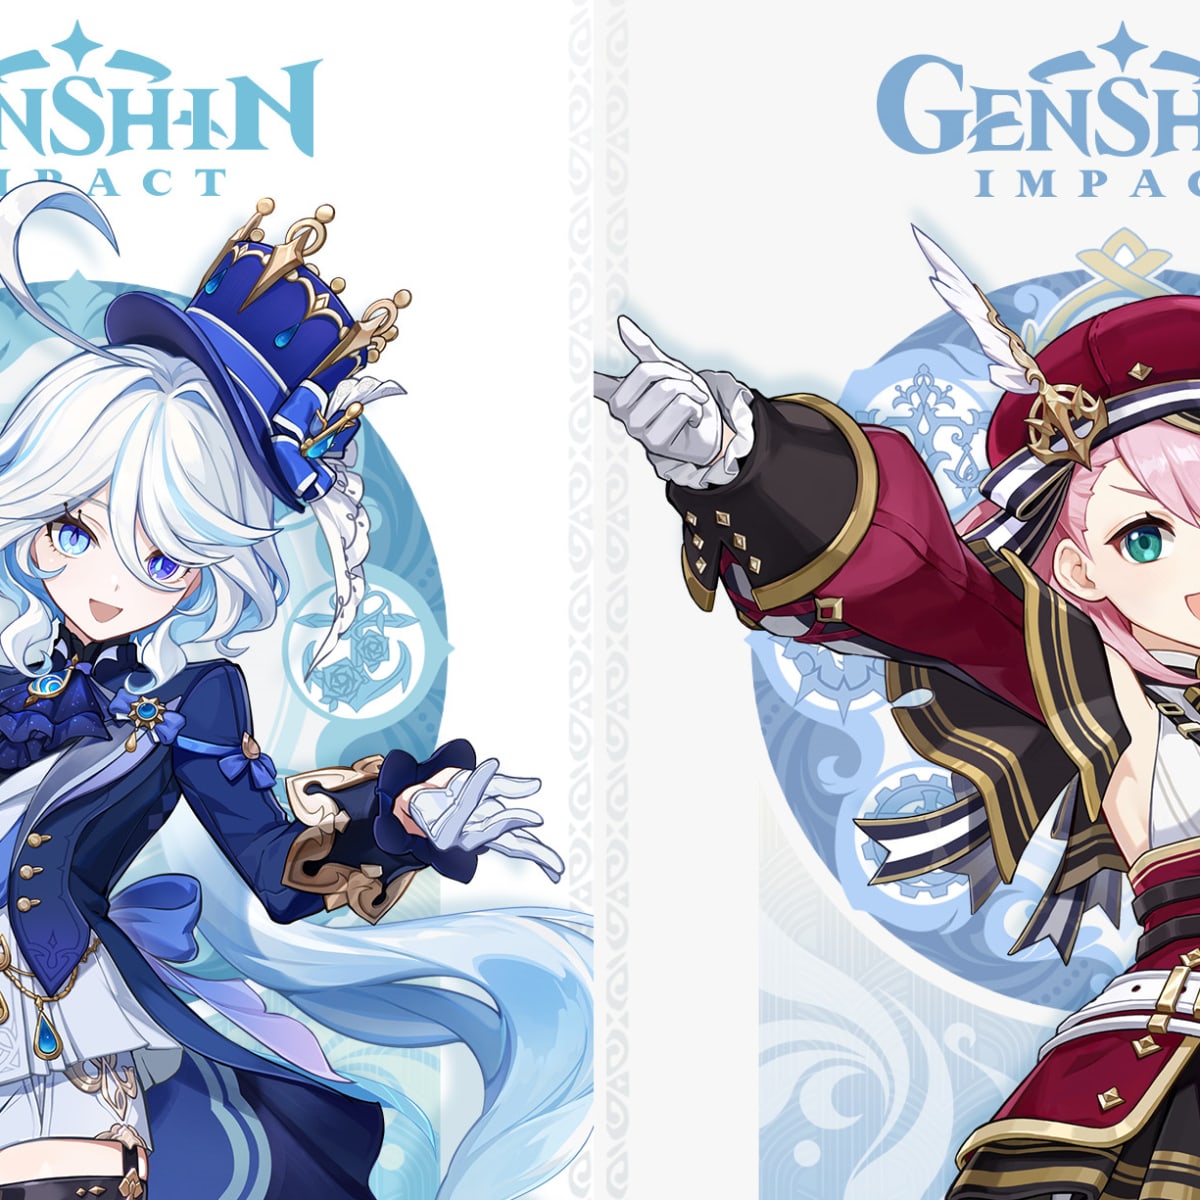 The Genshin Impact 4.0 codes are here